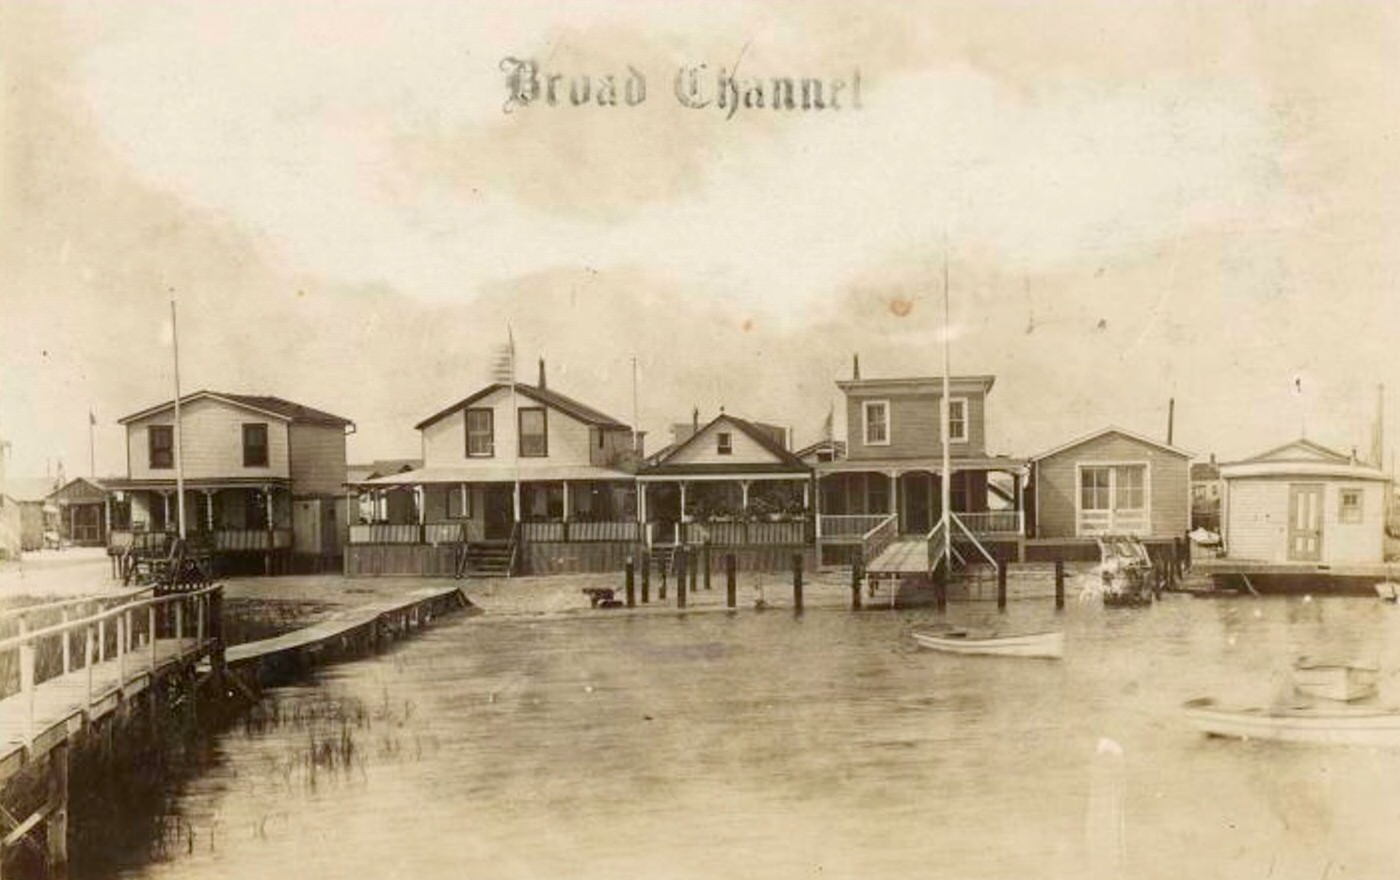 Broad Channel, 1911